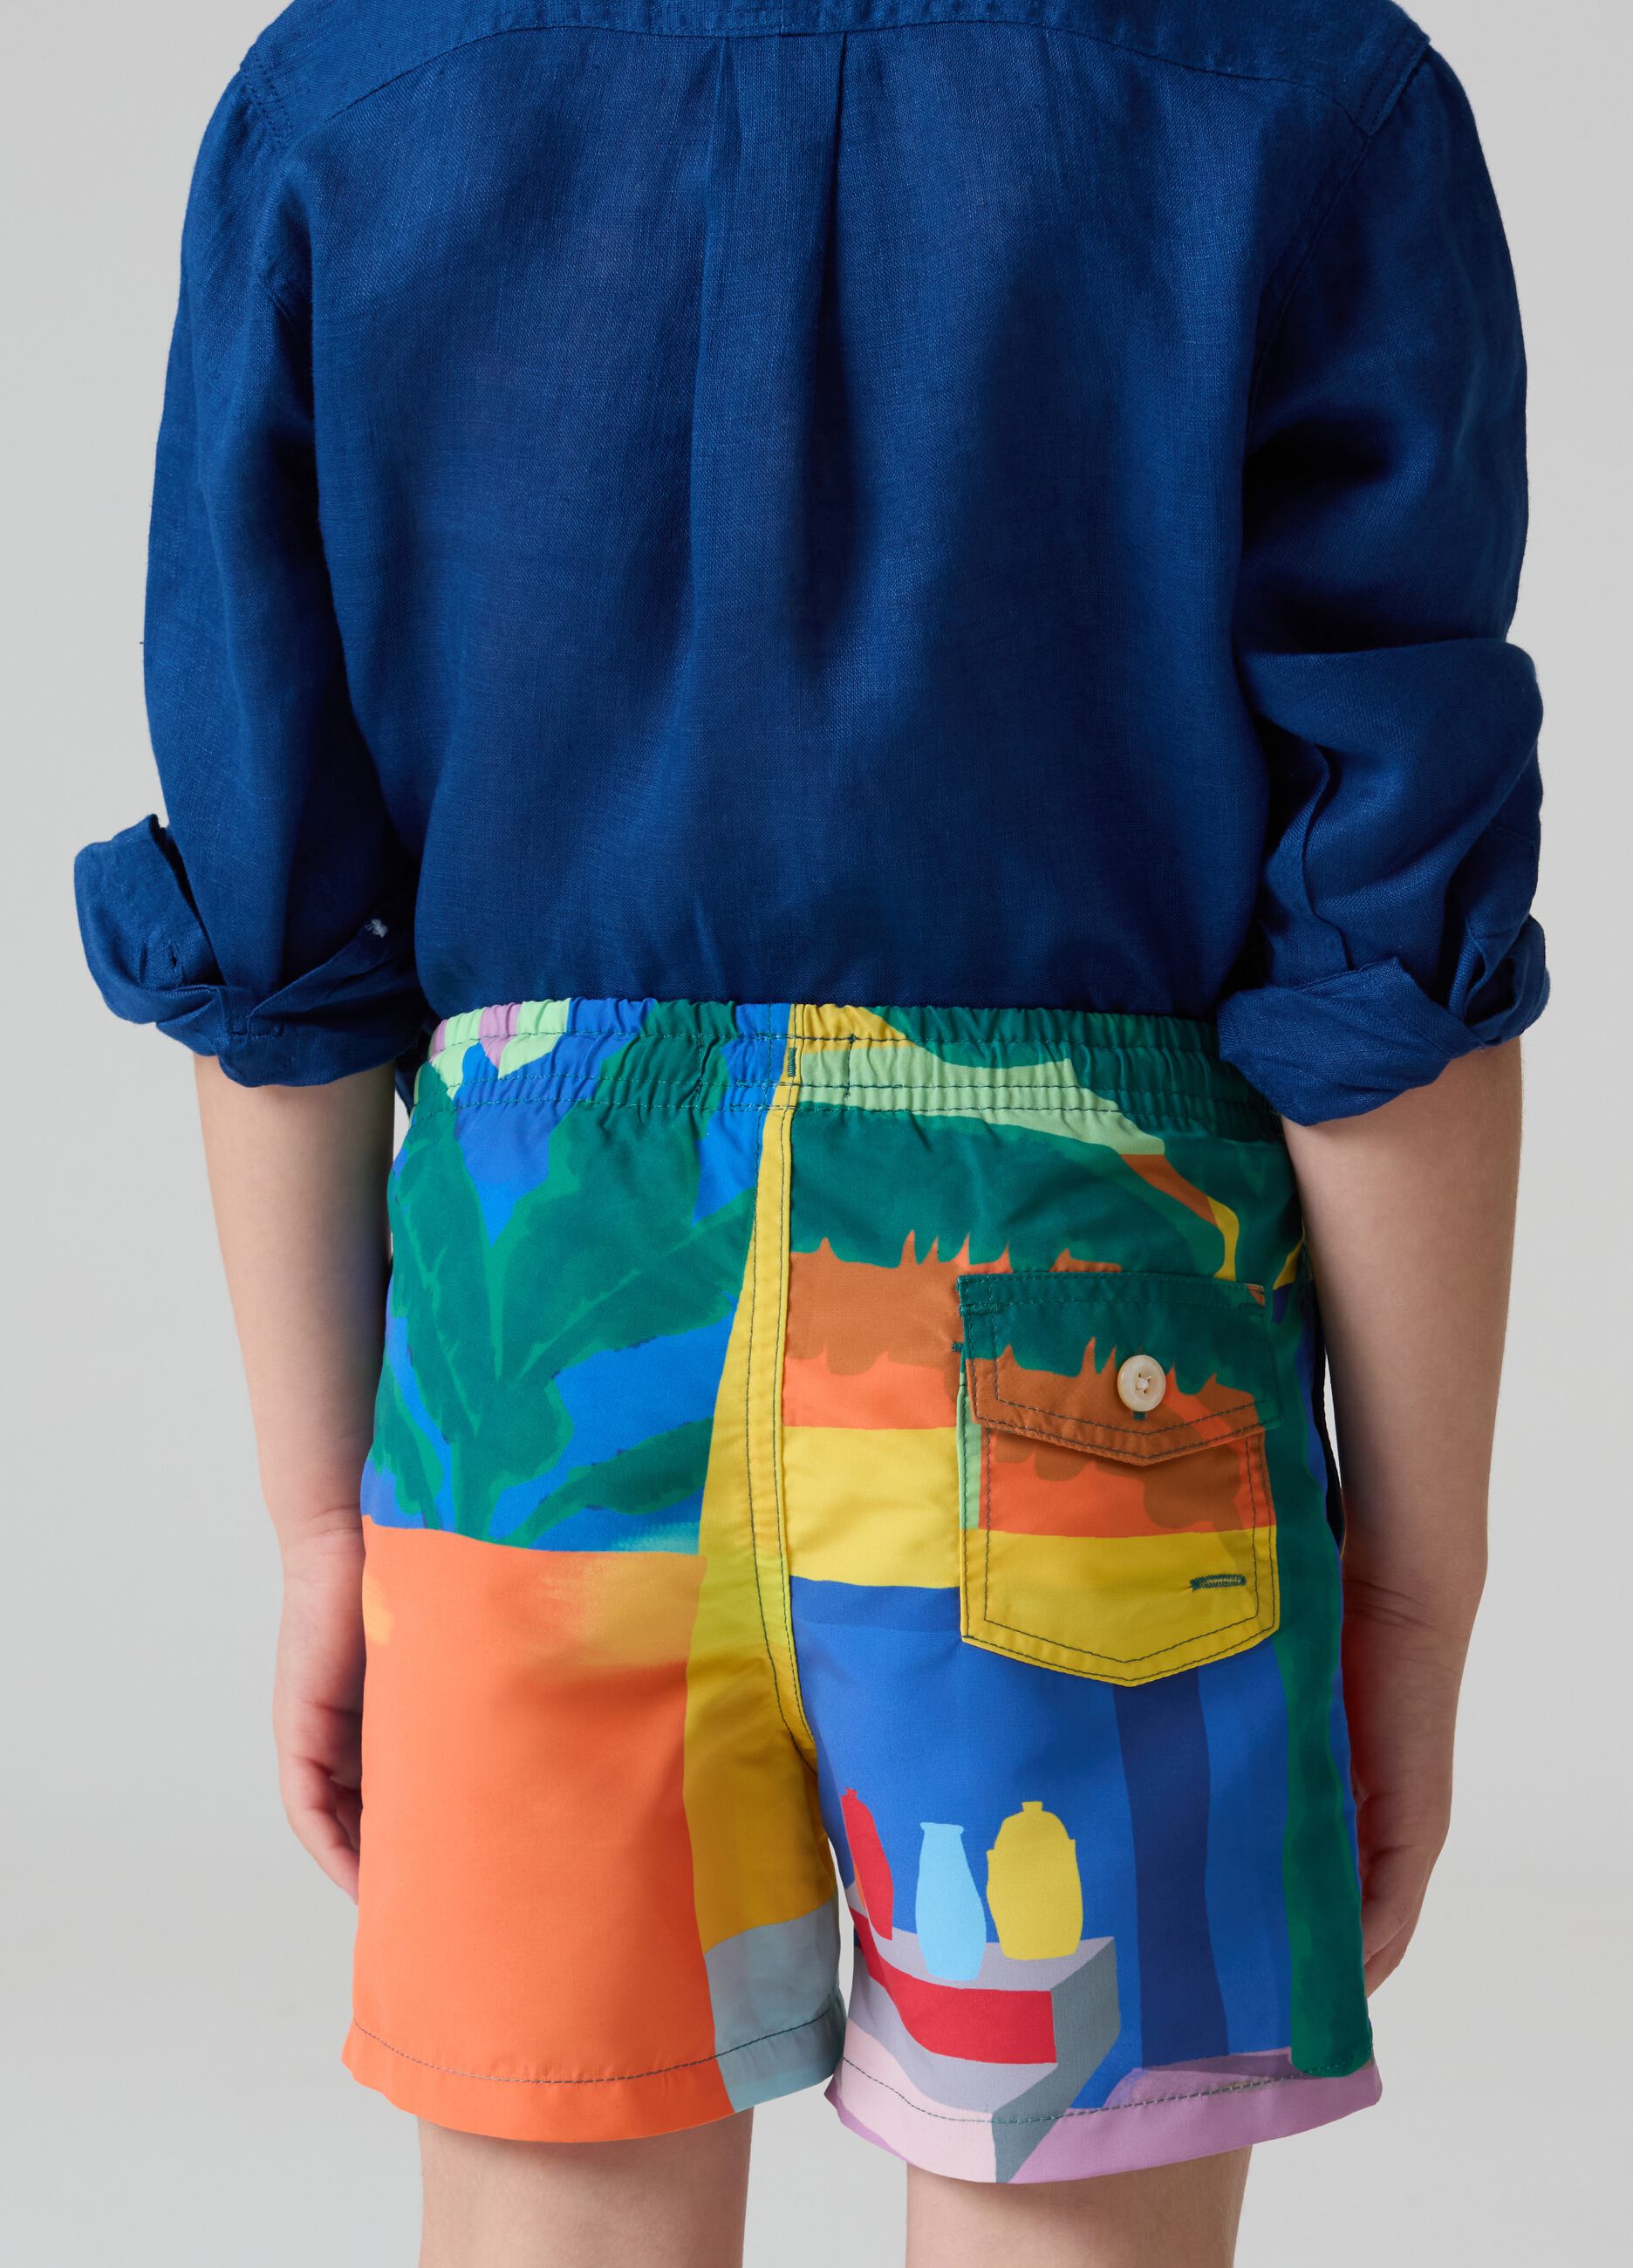 Swimming trunks with drawstring and landscape print